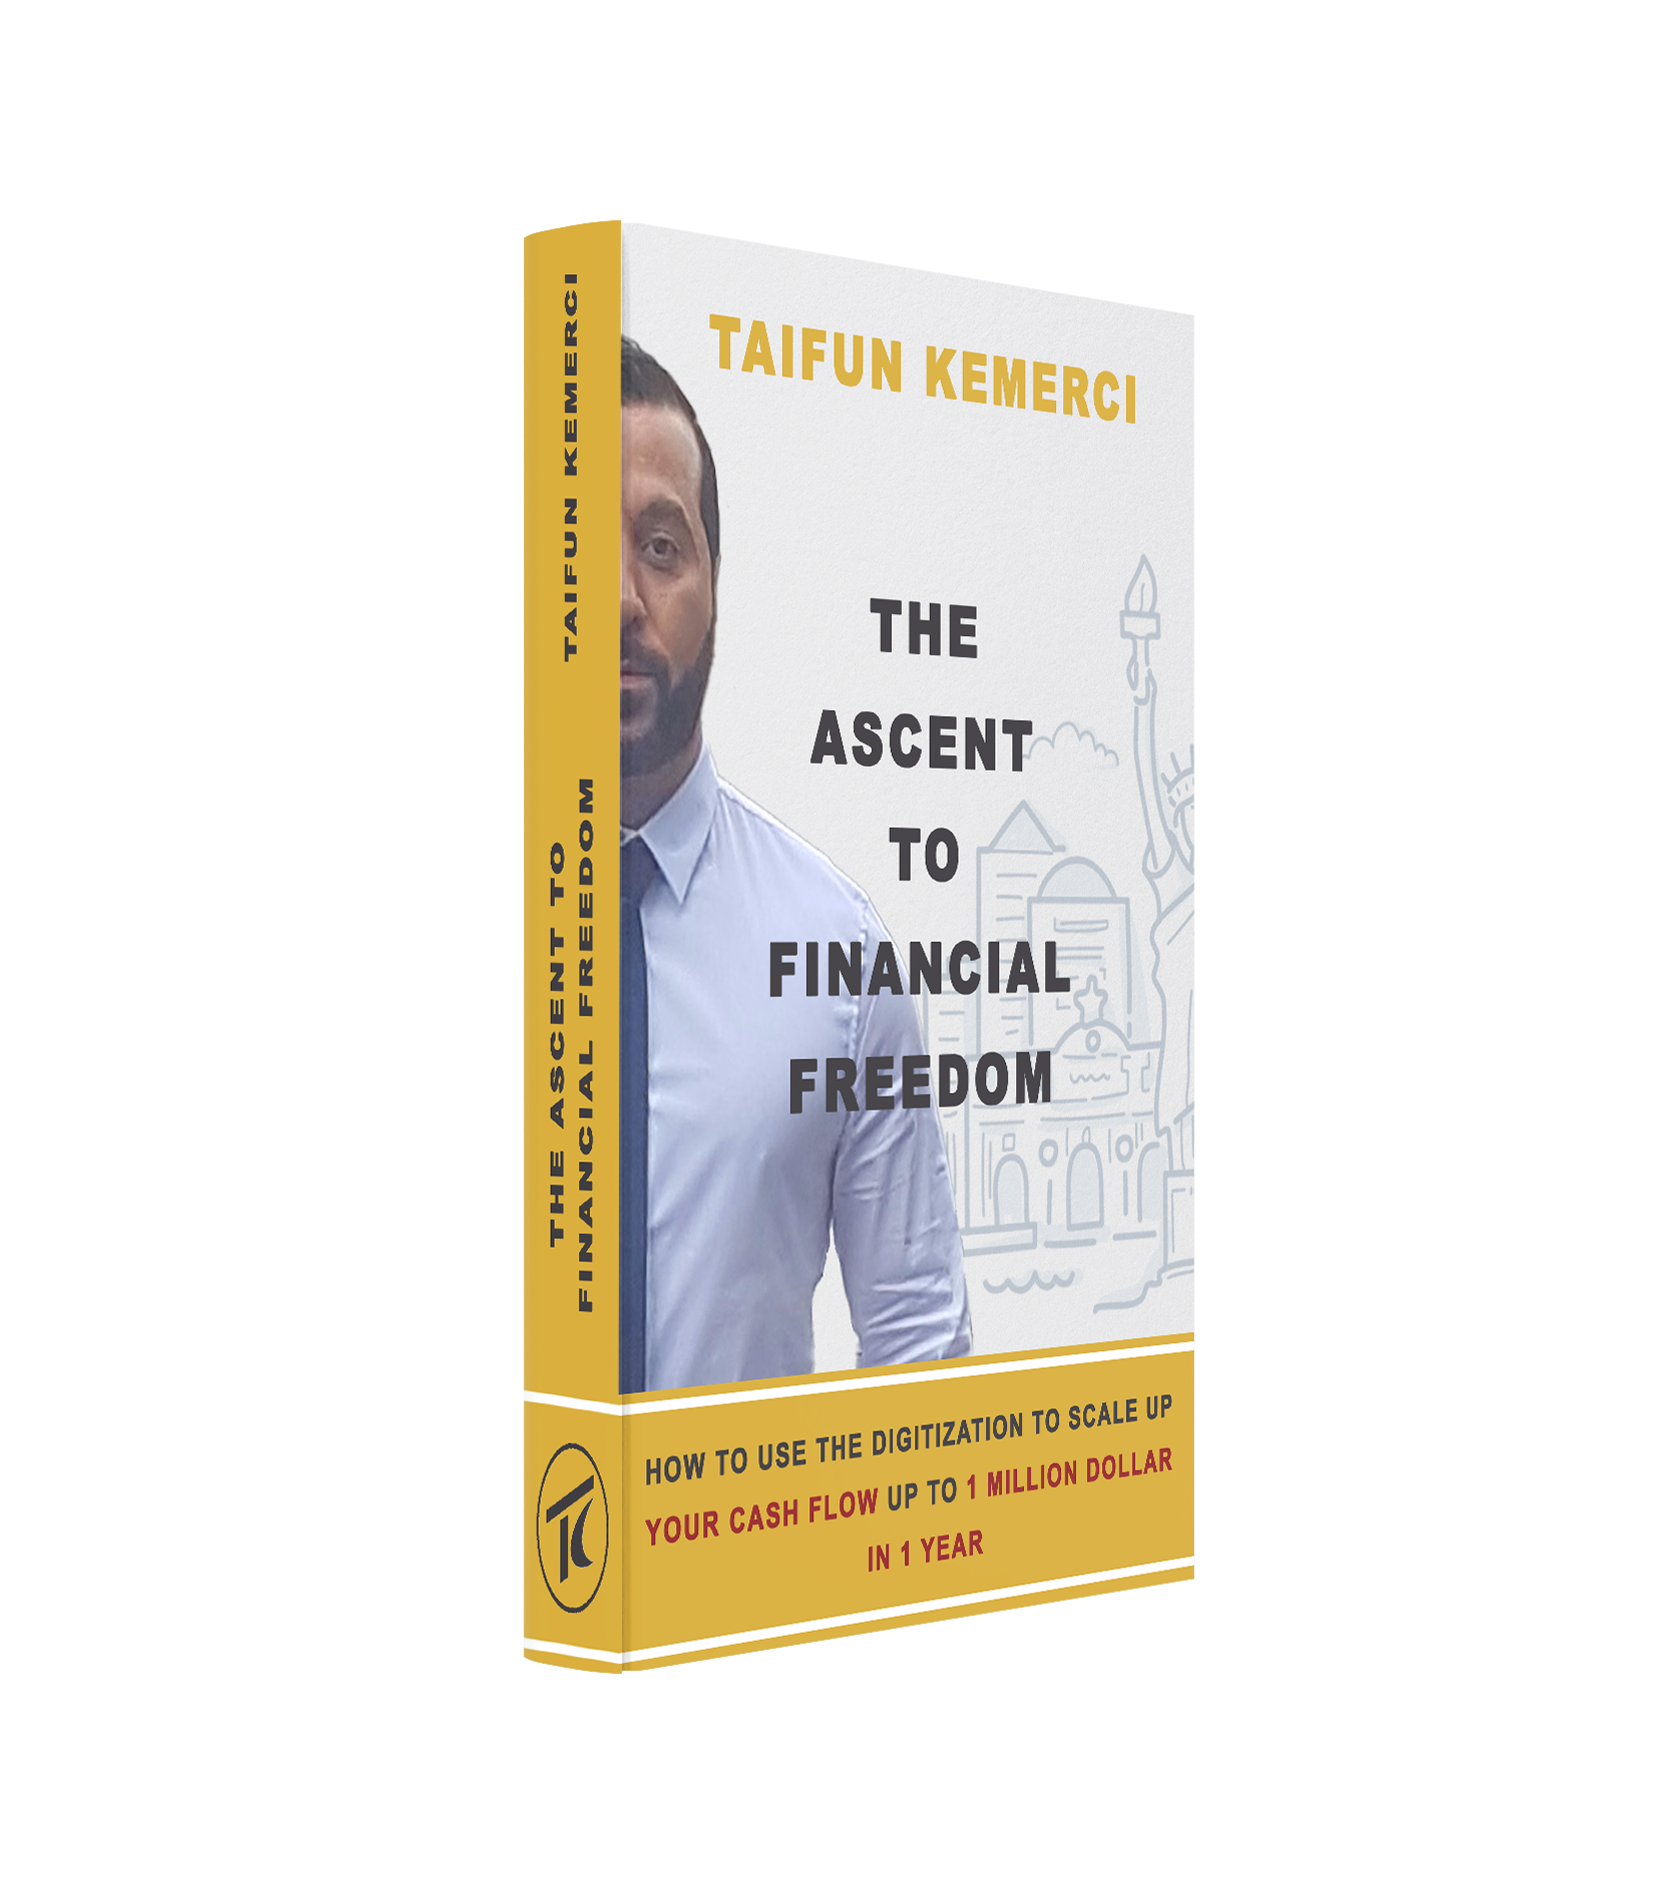 THE ASCENT TO FINANCIAL FREEDOM